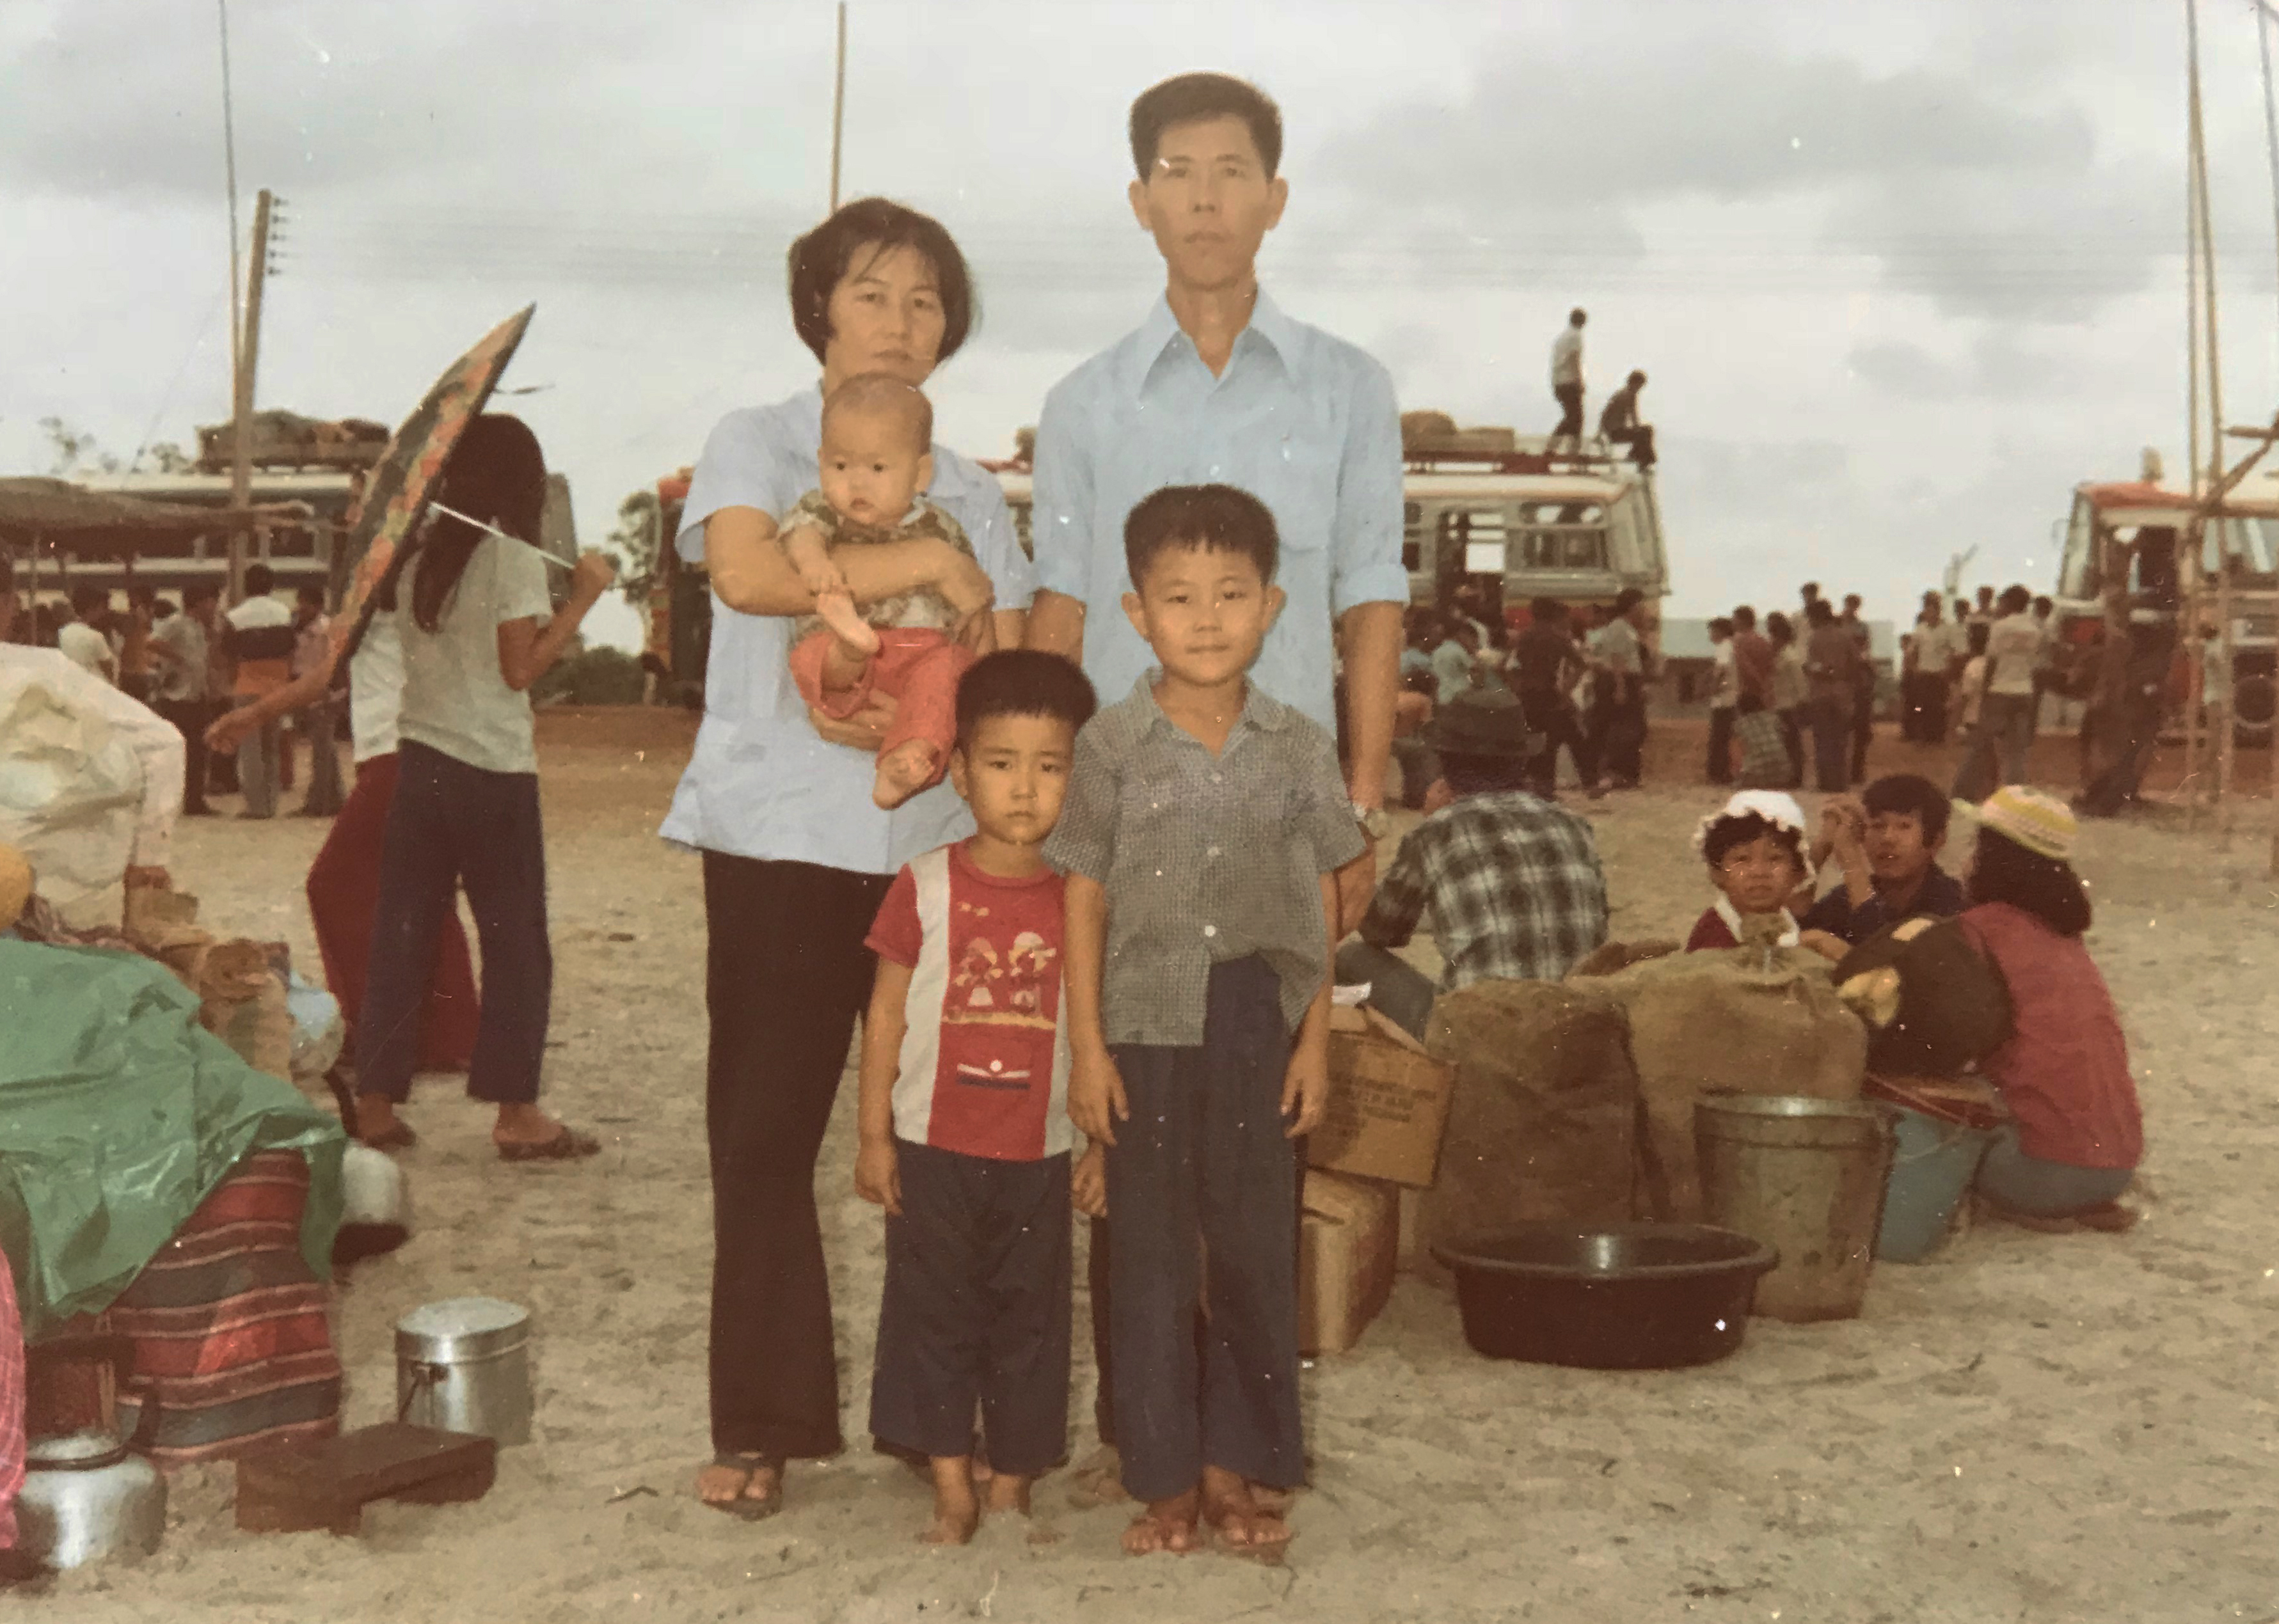 My family at the Thai refugee camp where we lived before starting our new life in Australia.